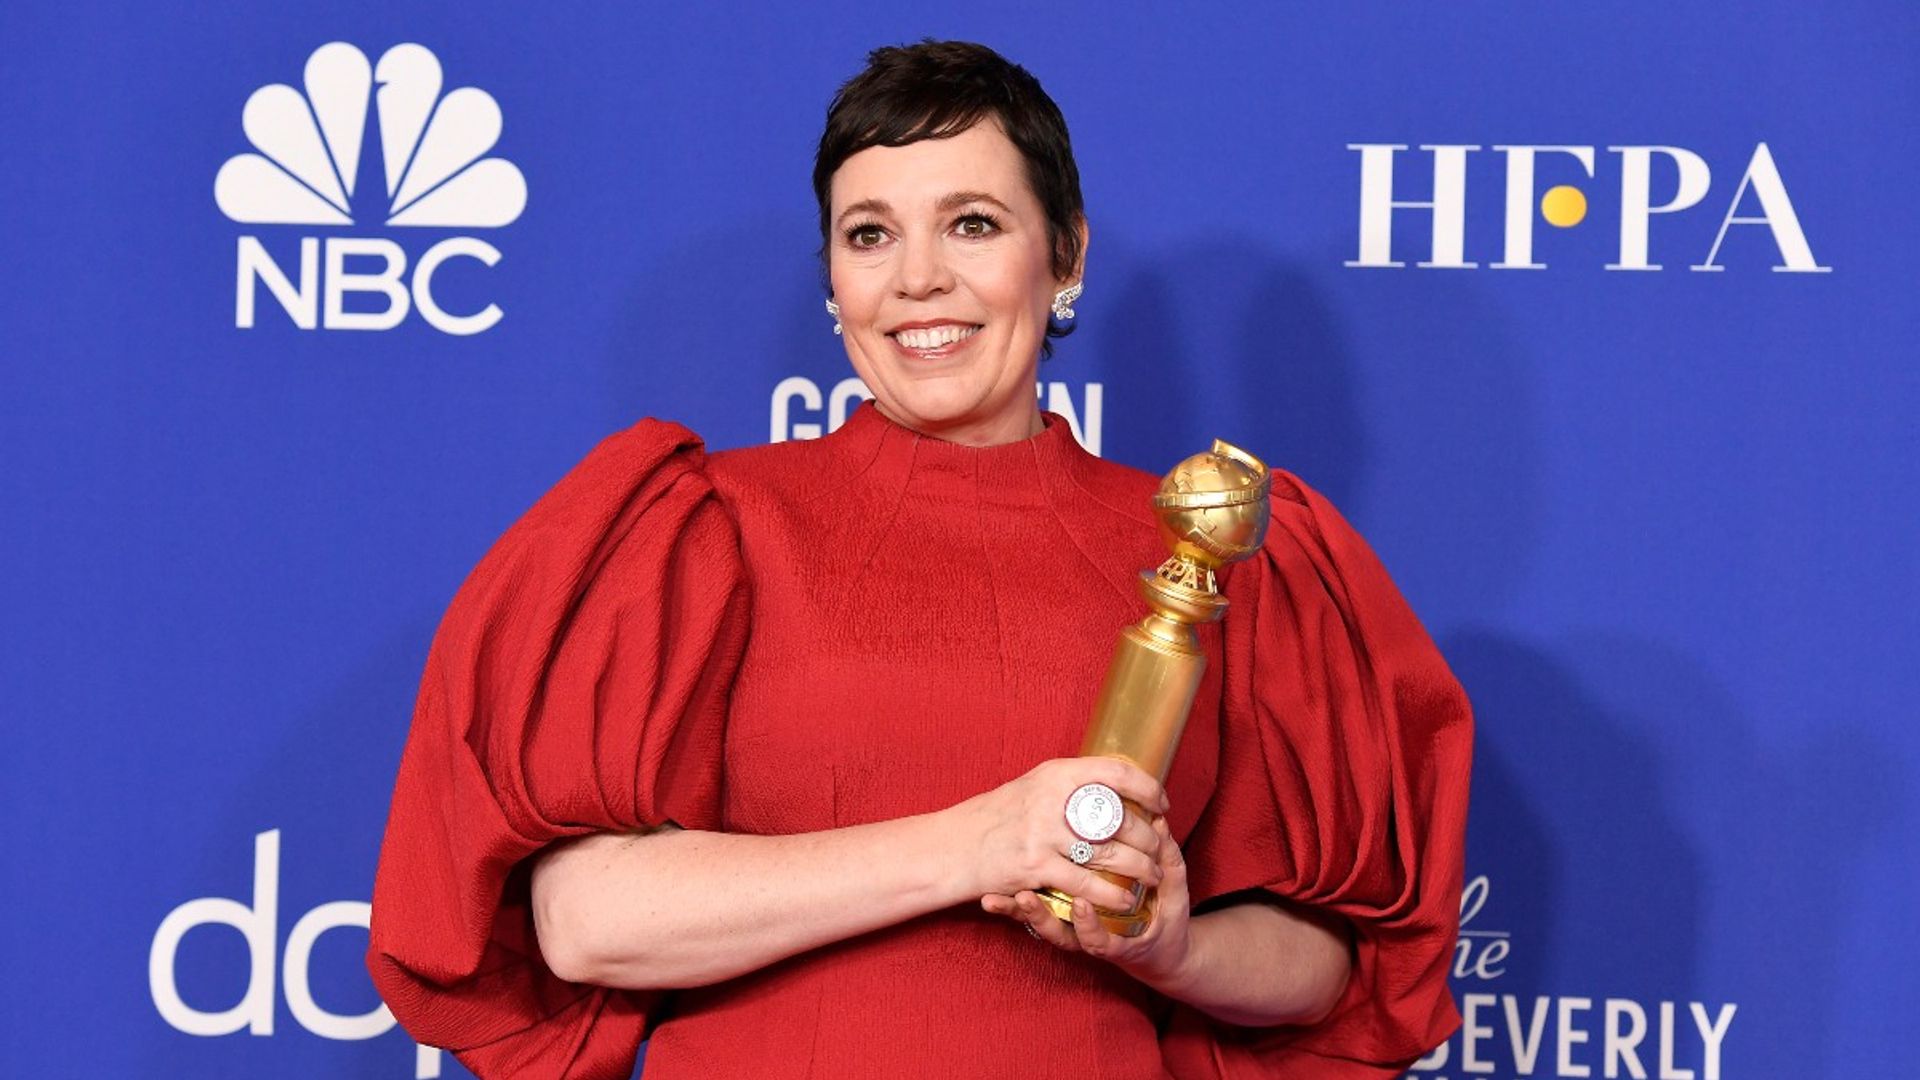 The full list of Golden Globes 2020 winners is here